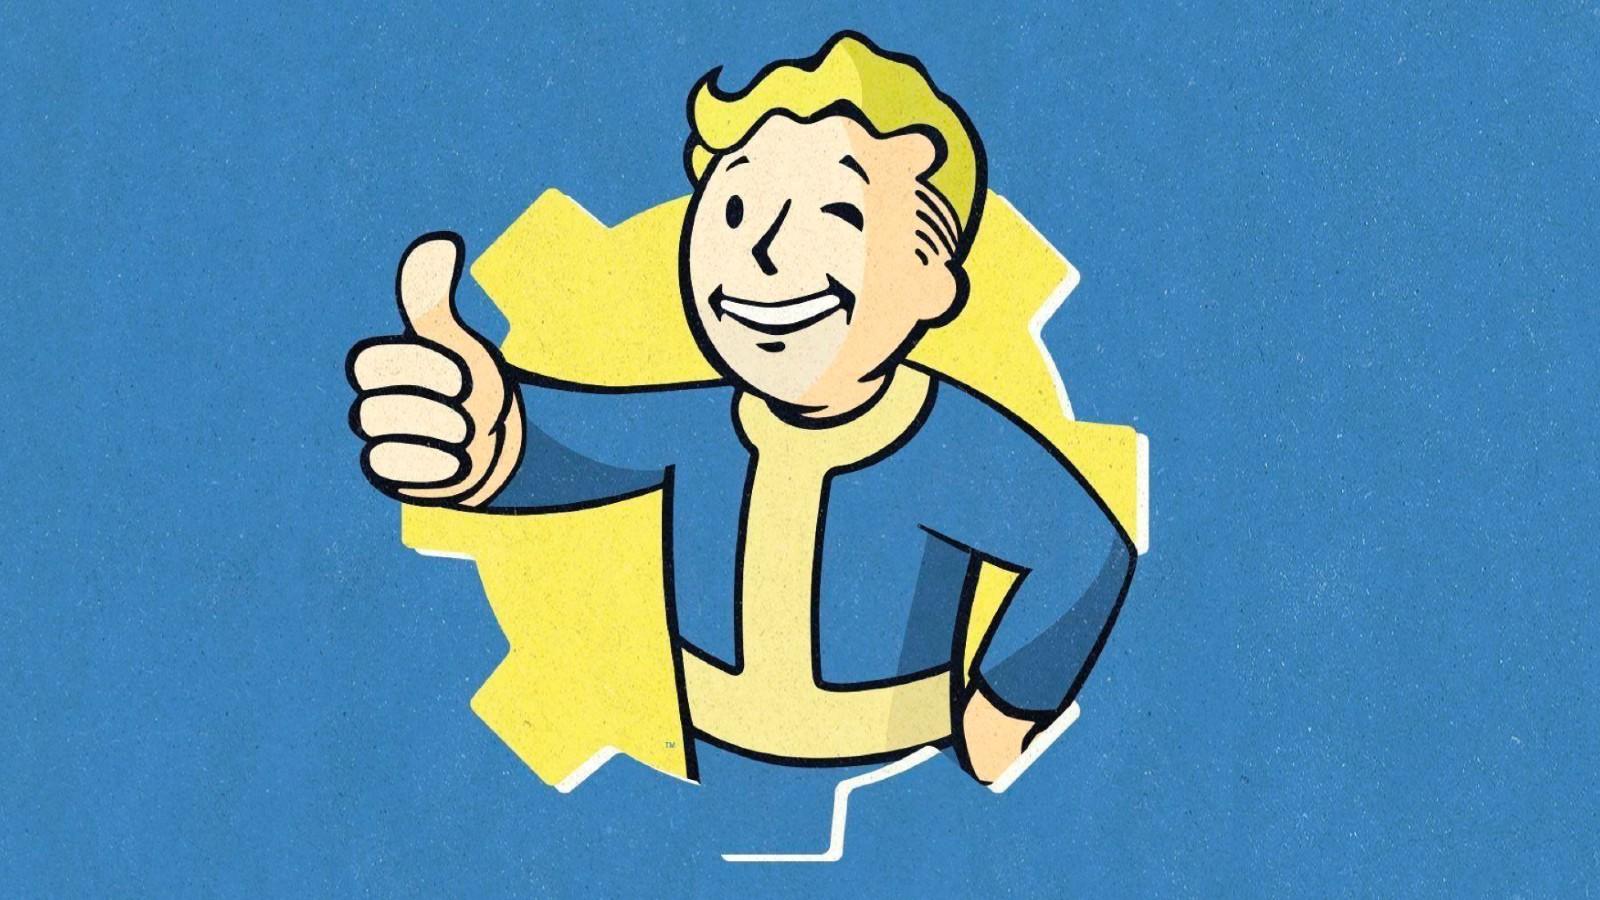 Vault Boy from Fallout